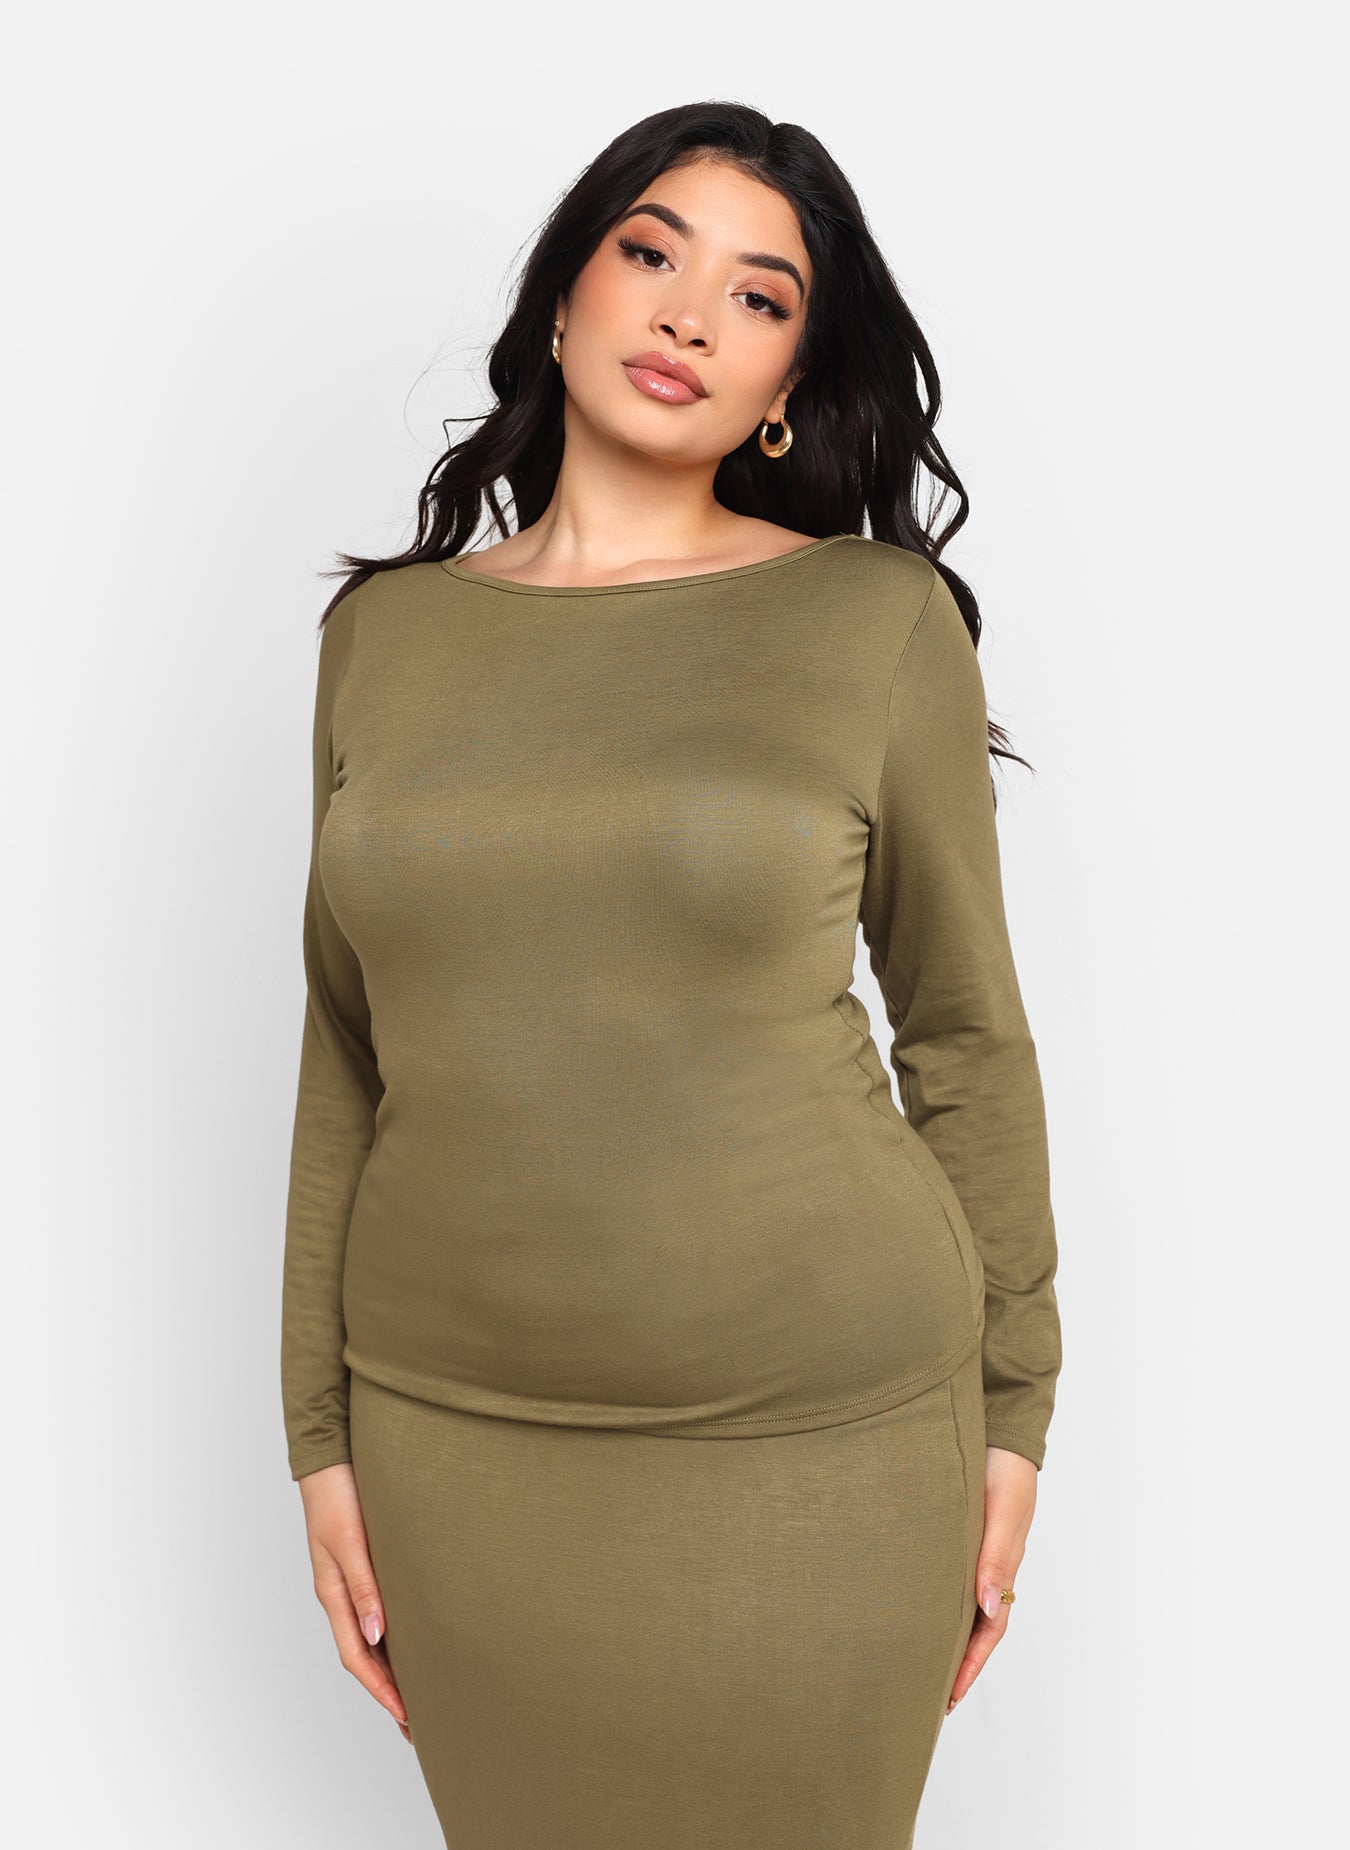 Claire Boat Neck Long Sleeve Top - Olive